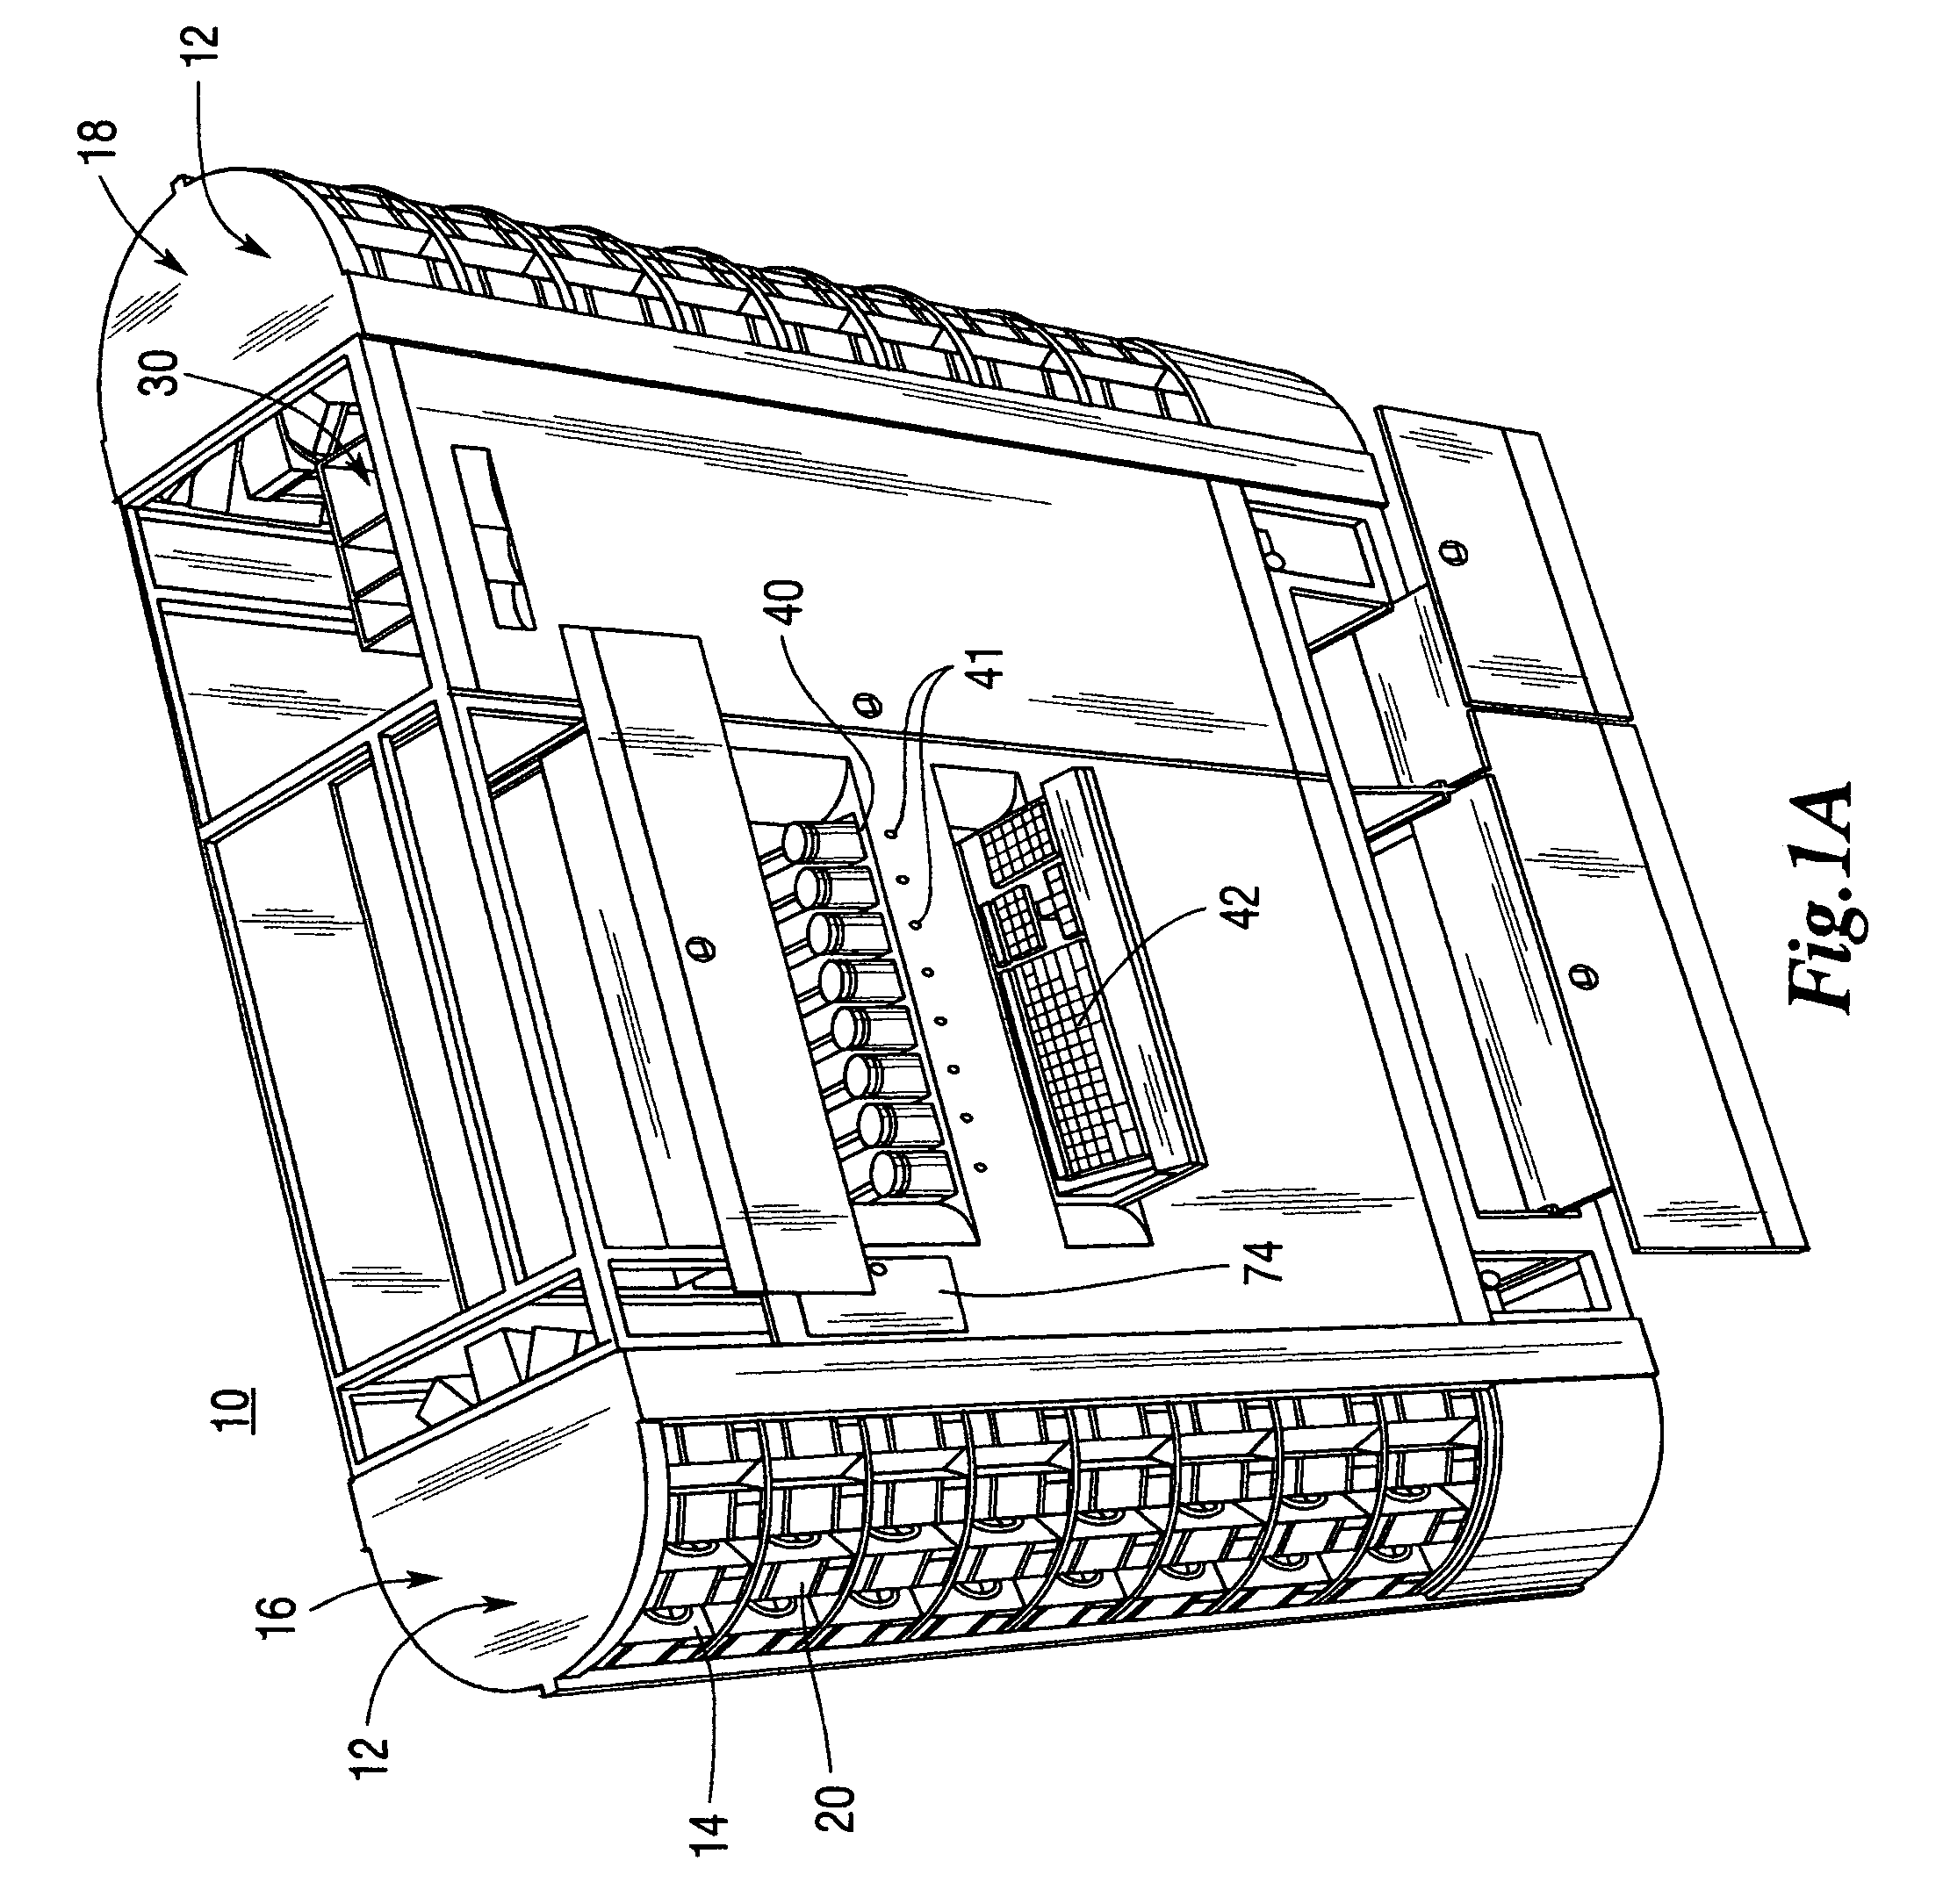 Prescription filling apparatus implementing a pick and place method